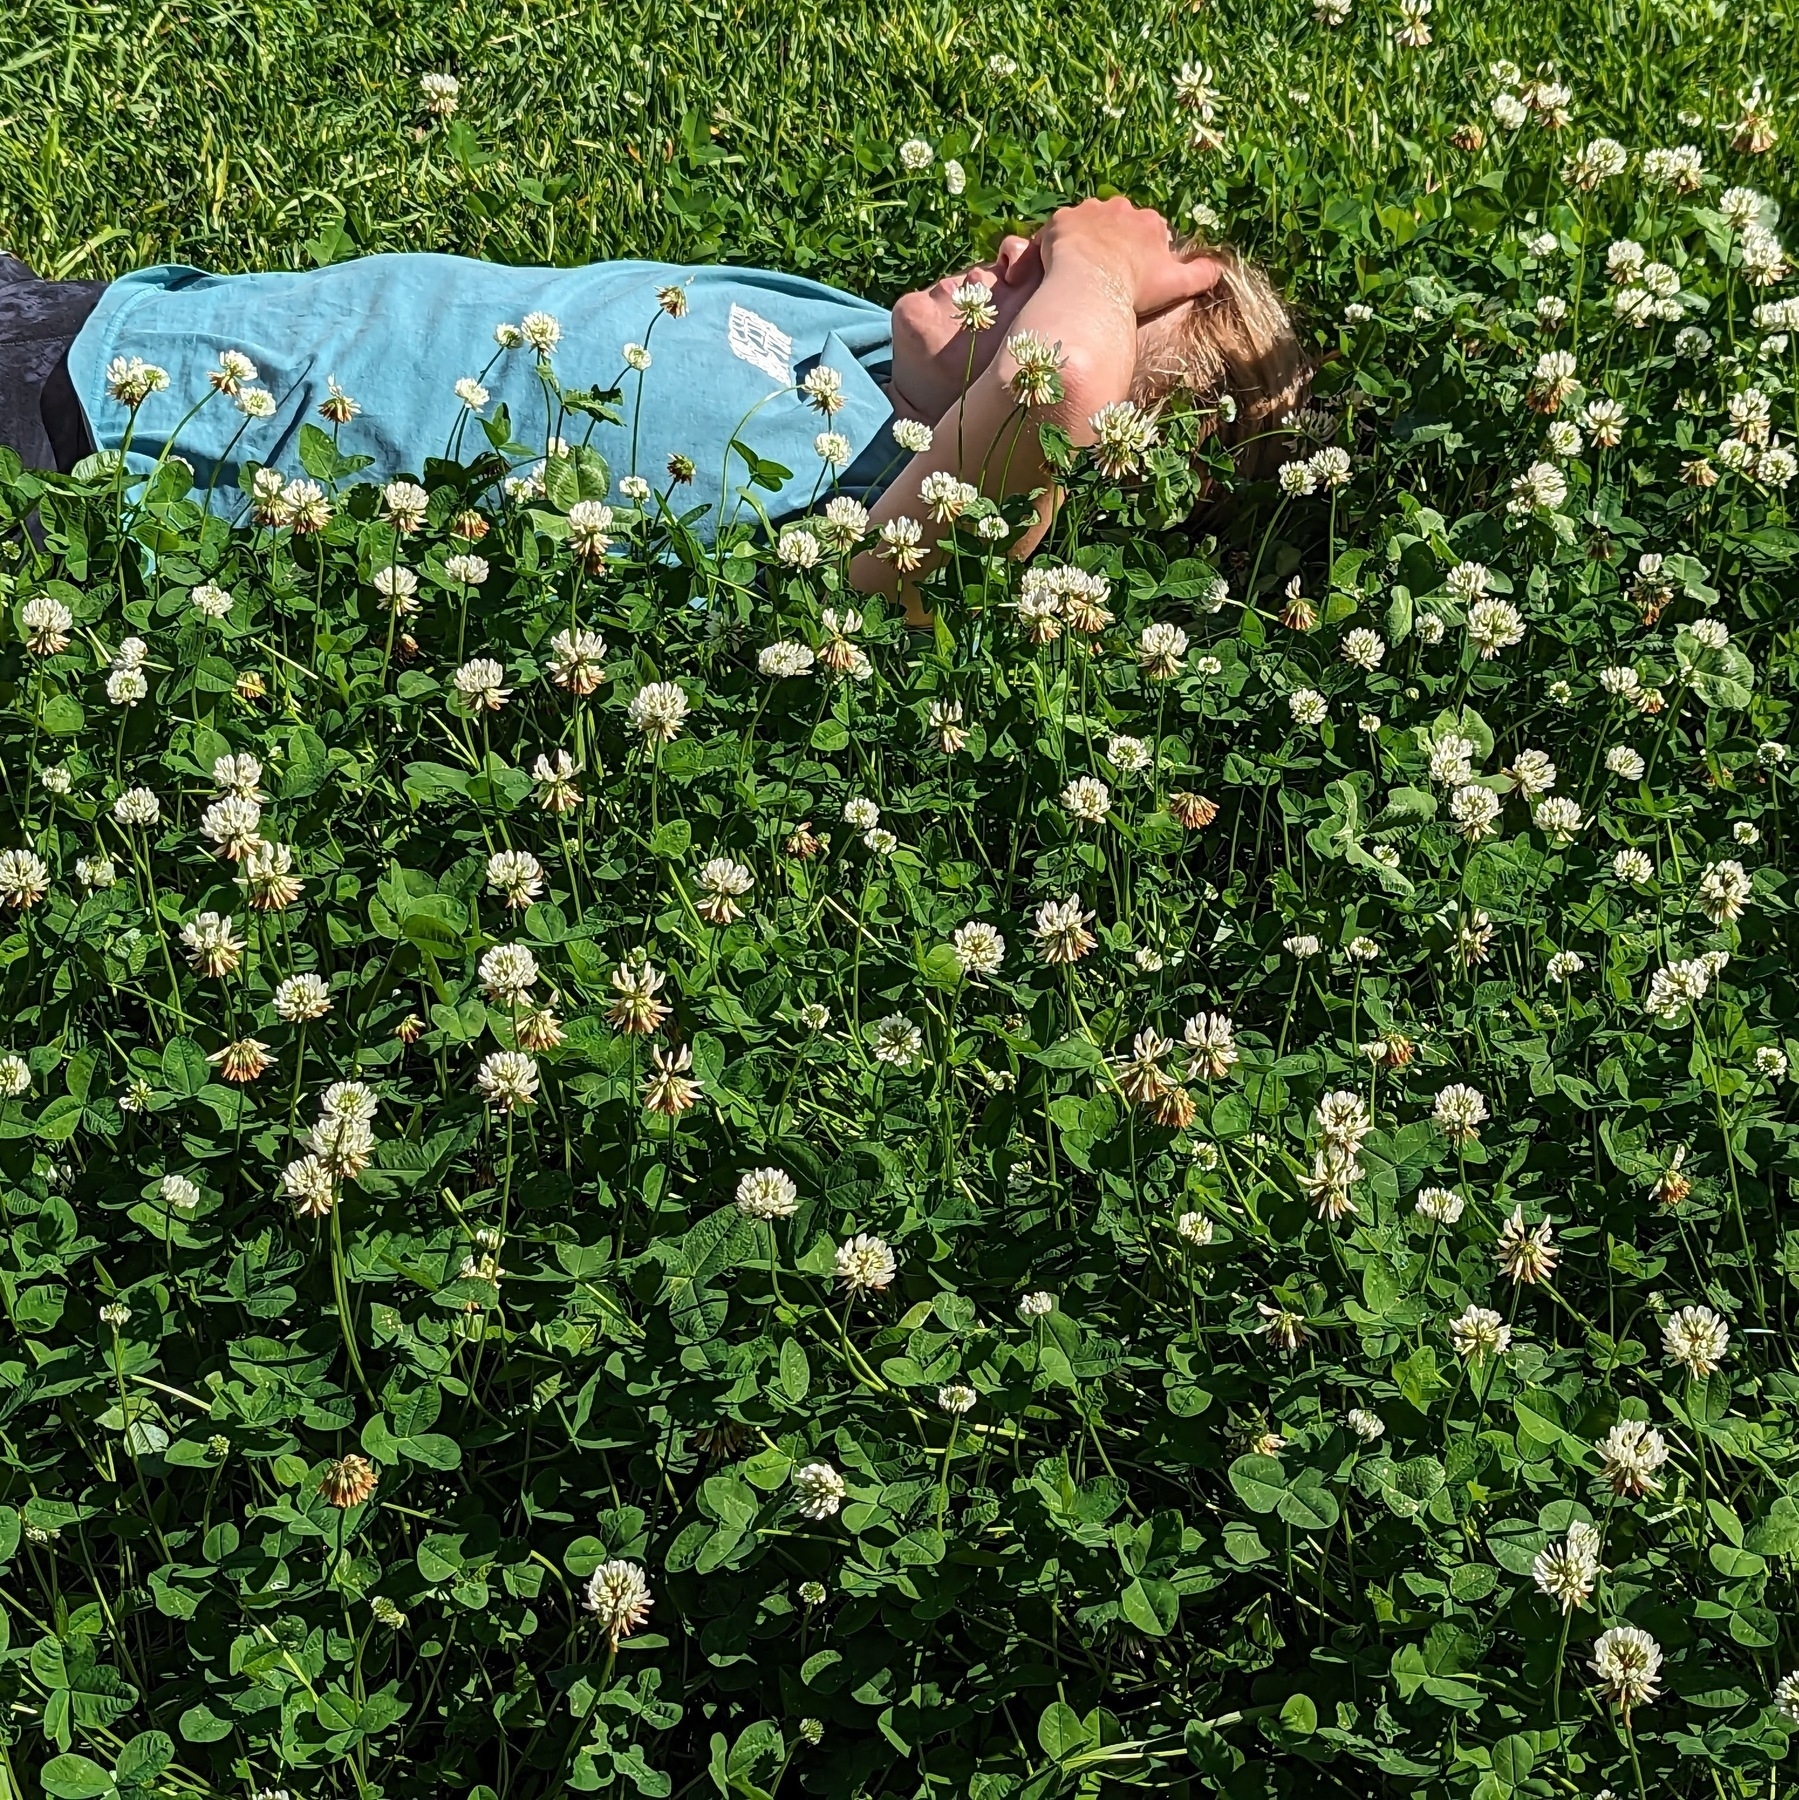 A person wearing teal relaxes in a bed of flowering clover.